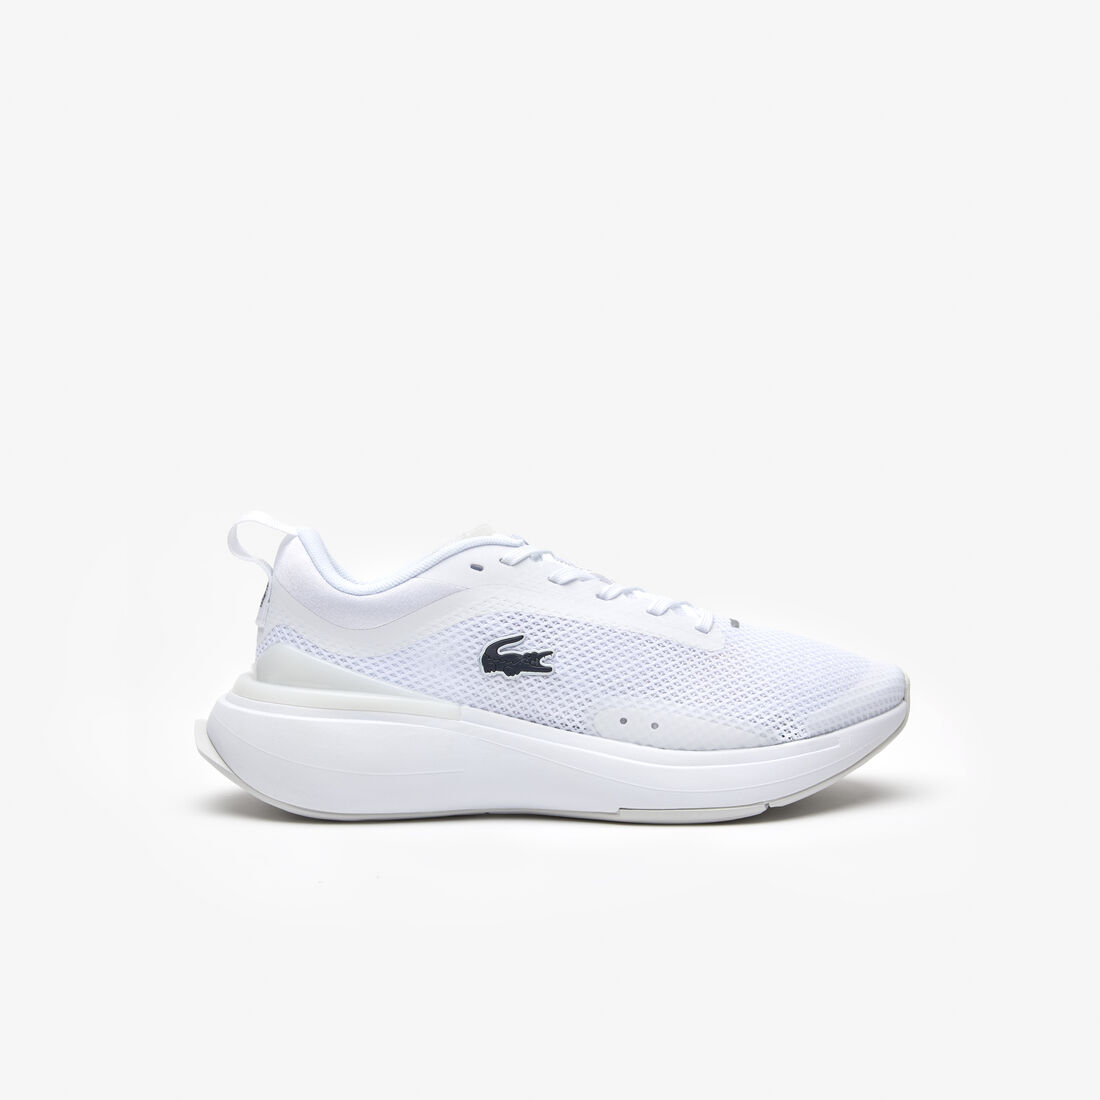 Buy Women's Lacoste Run Spin Evolution Textile Trainers | Lacoste UAE